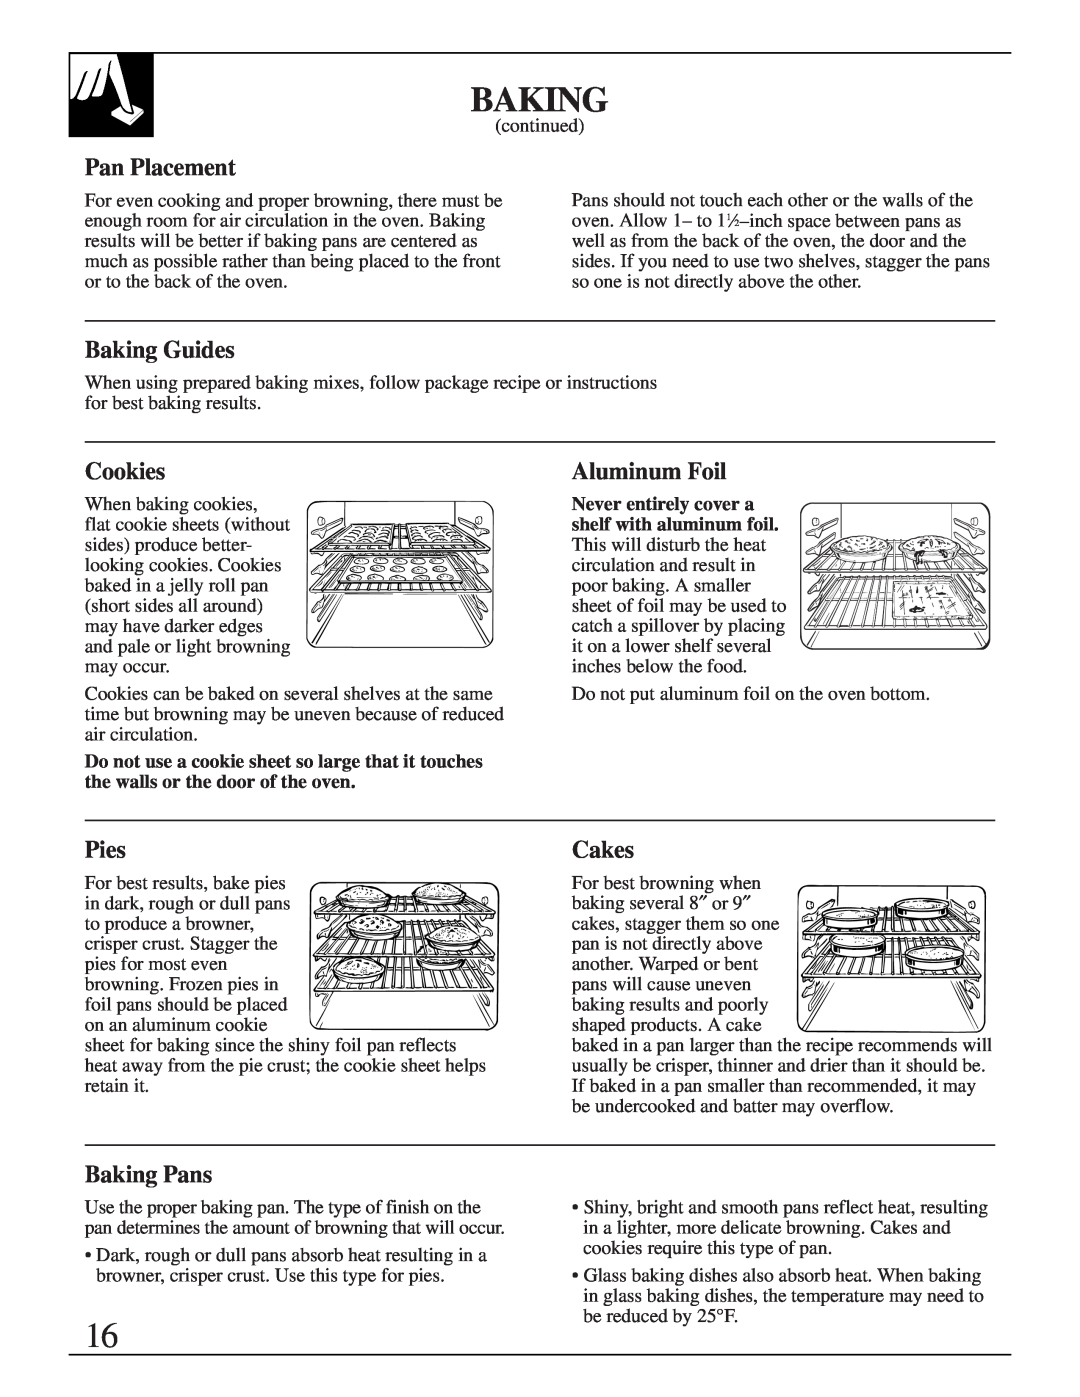 GE XL44 installation instructions Pan Placement, Baking Guides, Cookies, Aluminum Foil, Pies, Cakes, Baking Pans 